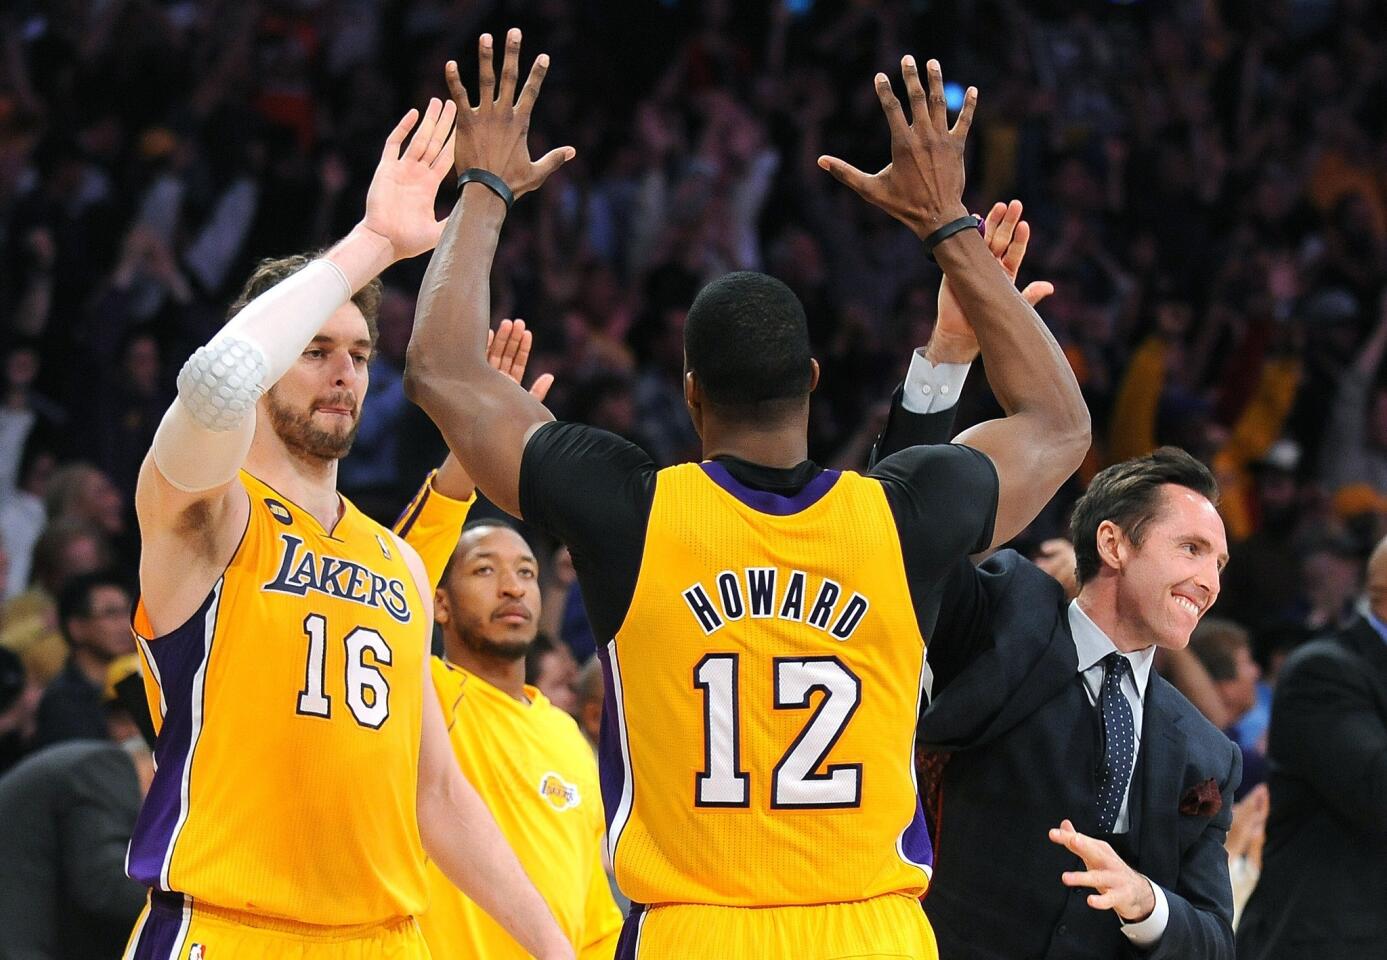 High-five, high-10, 15, 20 ... and keep going until you get to 40 -- as in 40-1 -- if you want to know the odds of the Lakers winning the NBA championship.